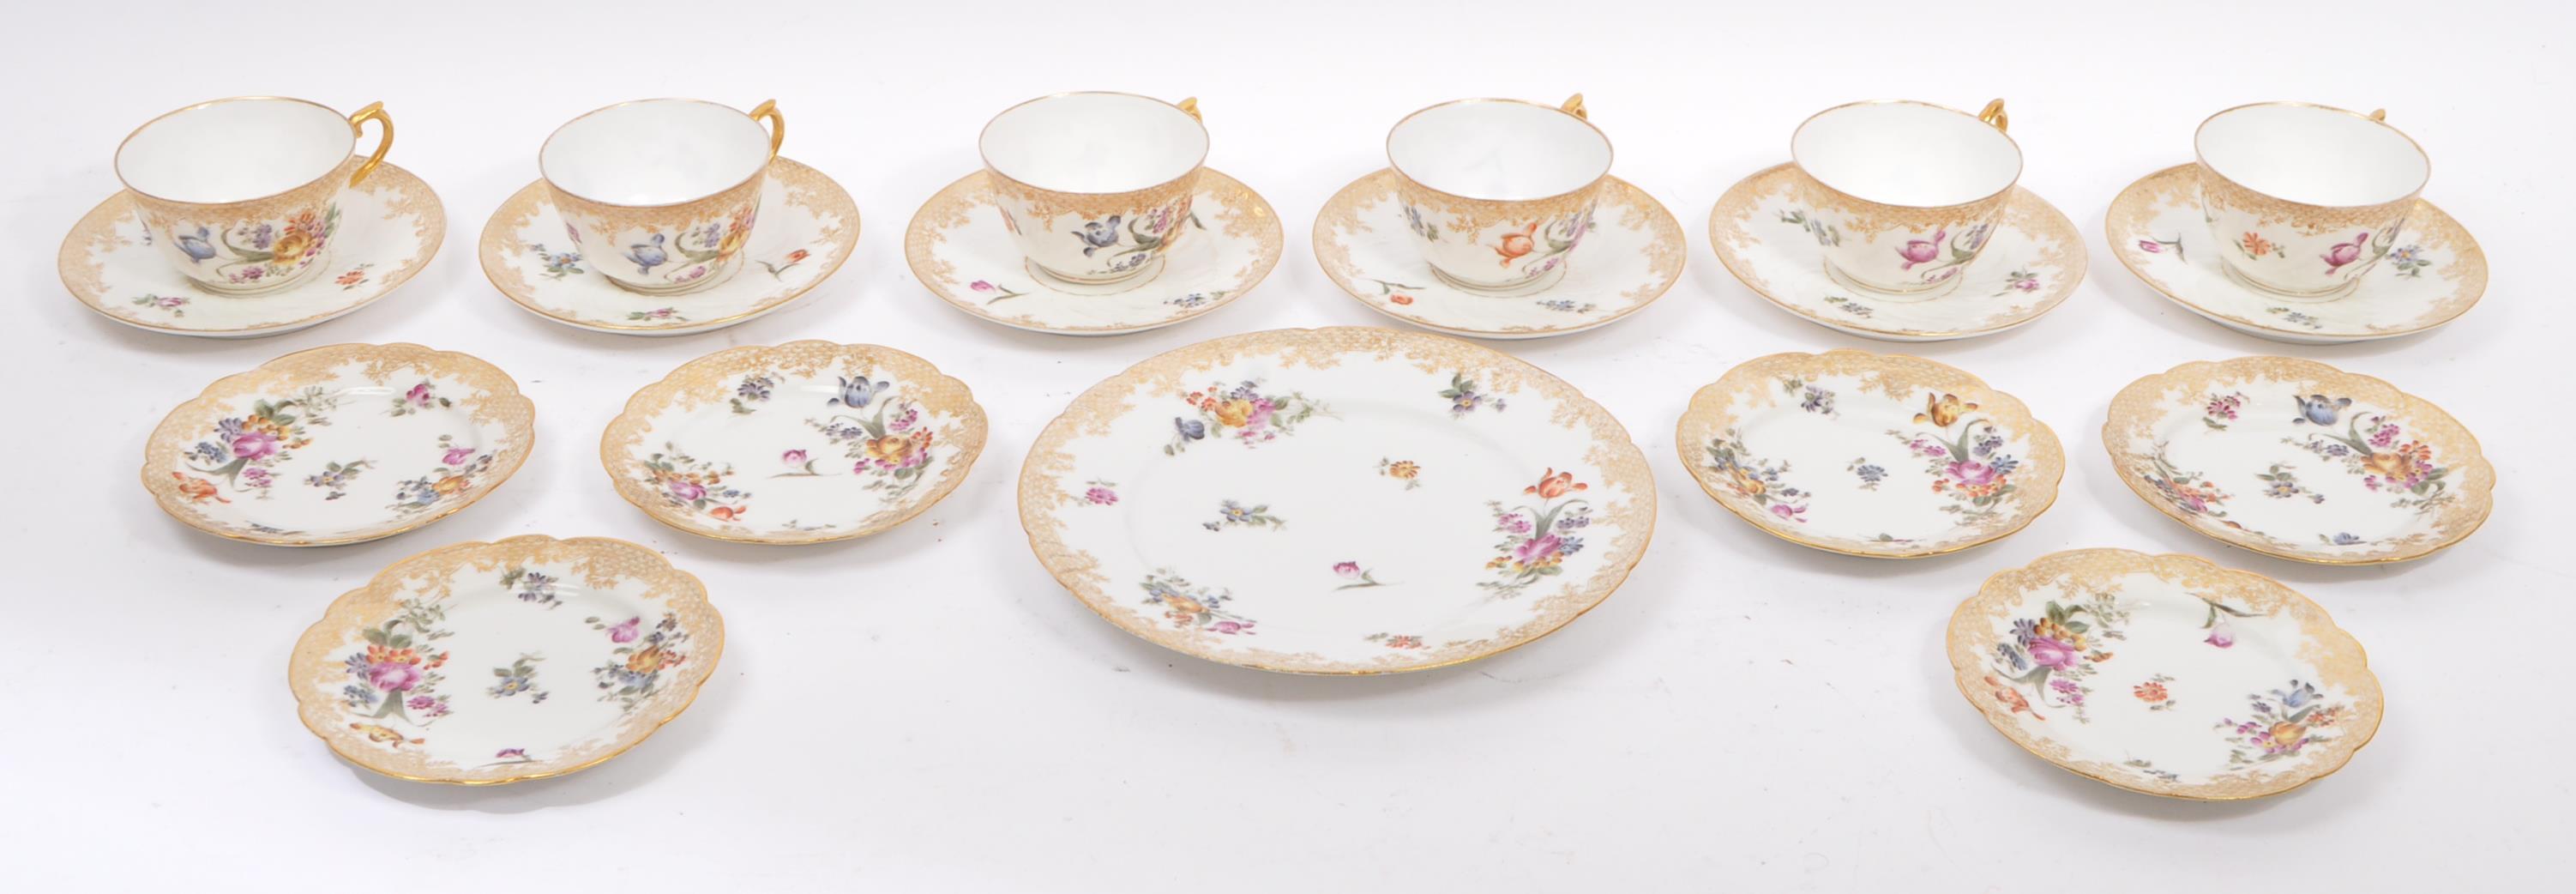 EARLY 20TH CENTURY HAND PAINTED LIMOGES CHINA TEA SERVICE